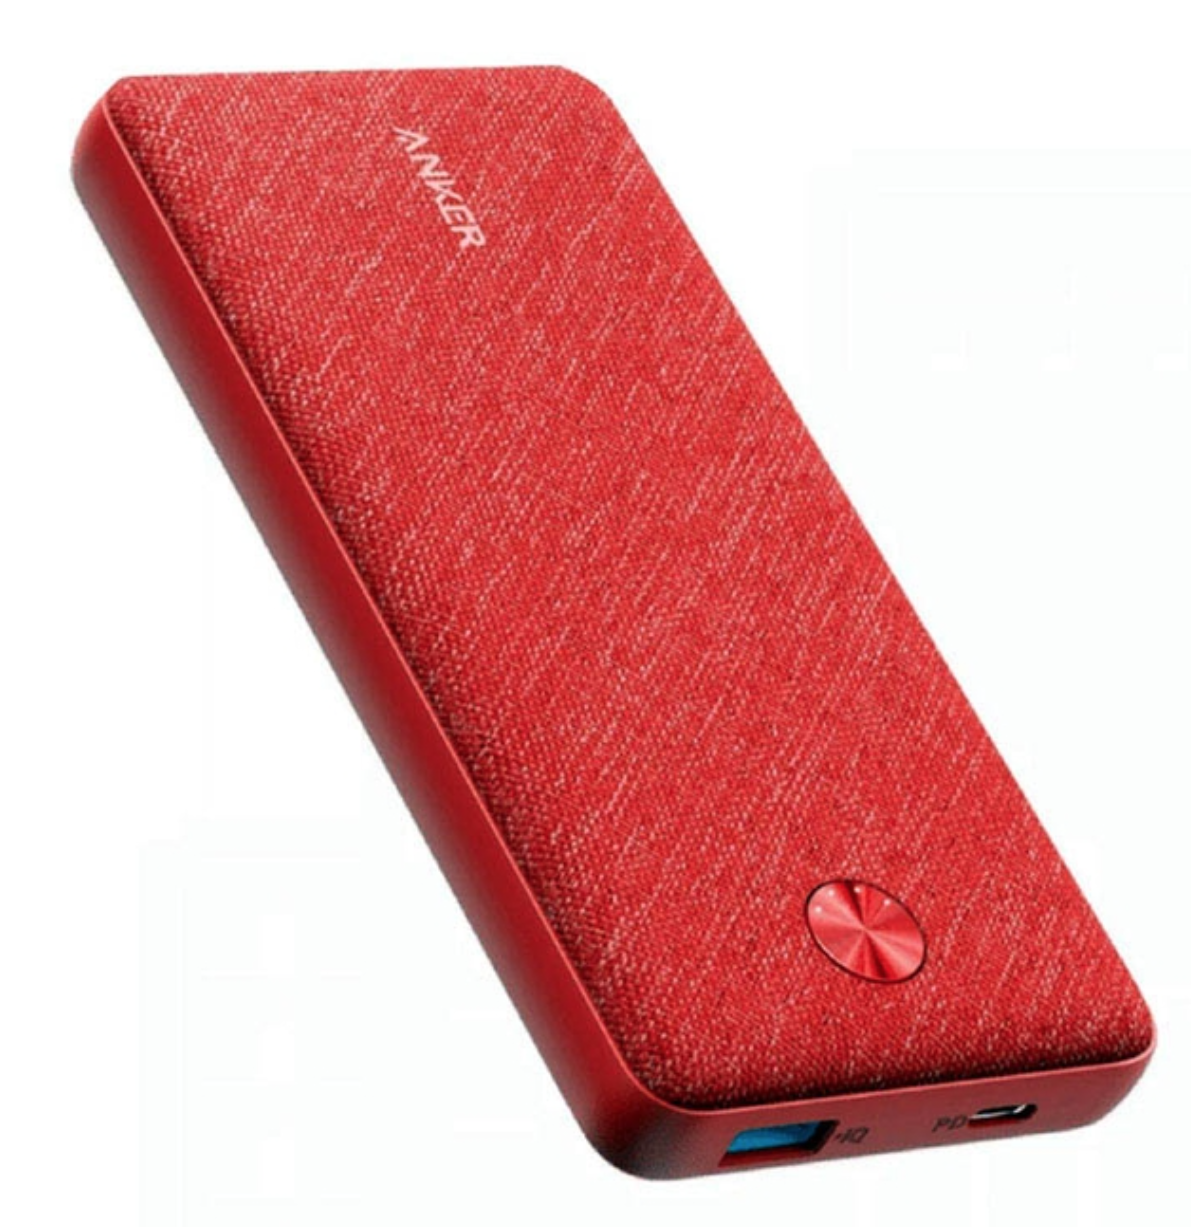 ANKER POWERCORE ESSENTIAL 20000 PD FABRIC RED